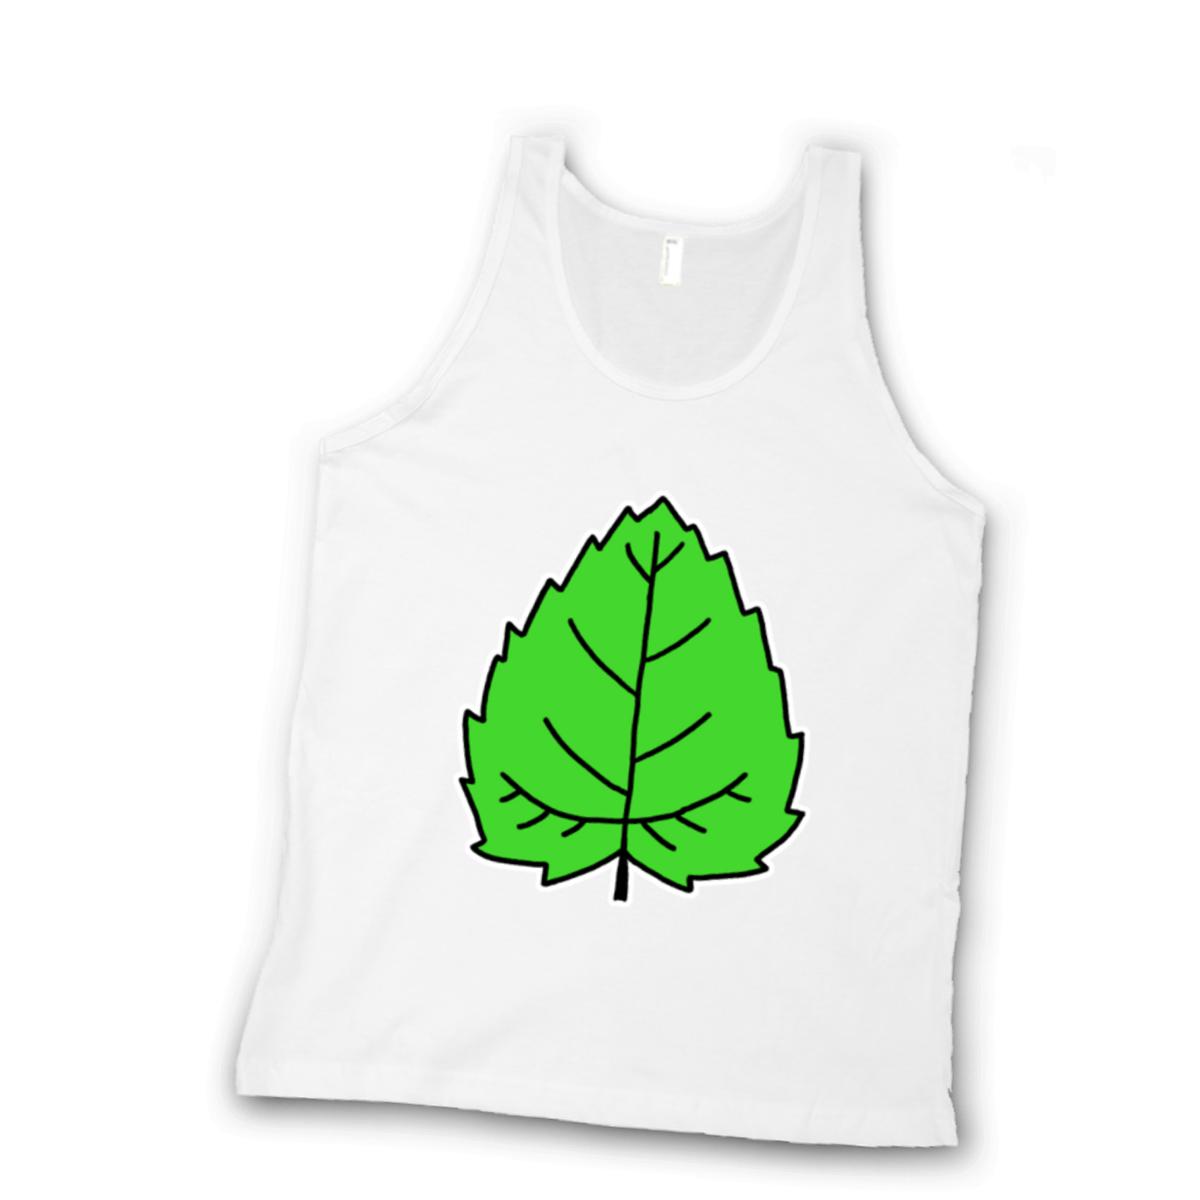 Mulberry Leaf Unisex Tank Top Large white